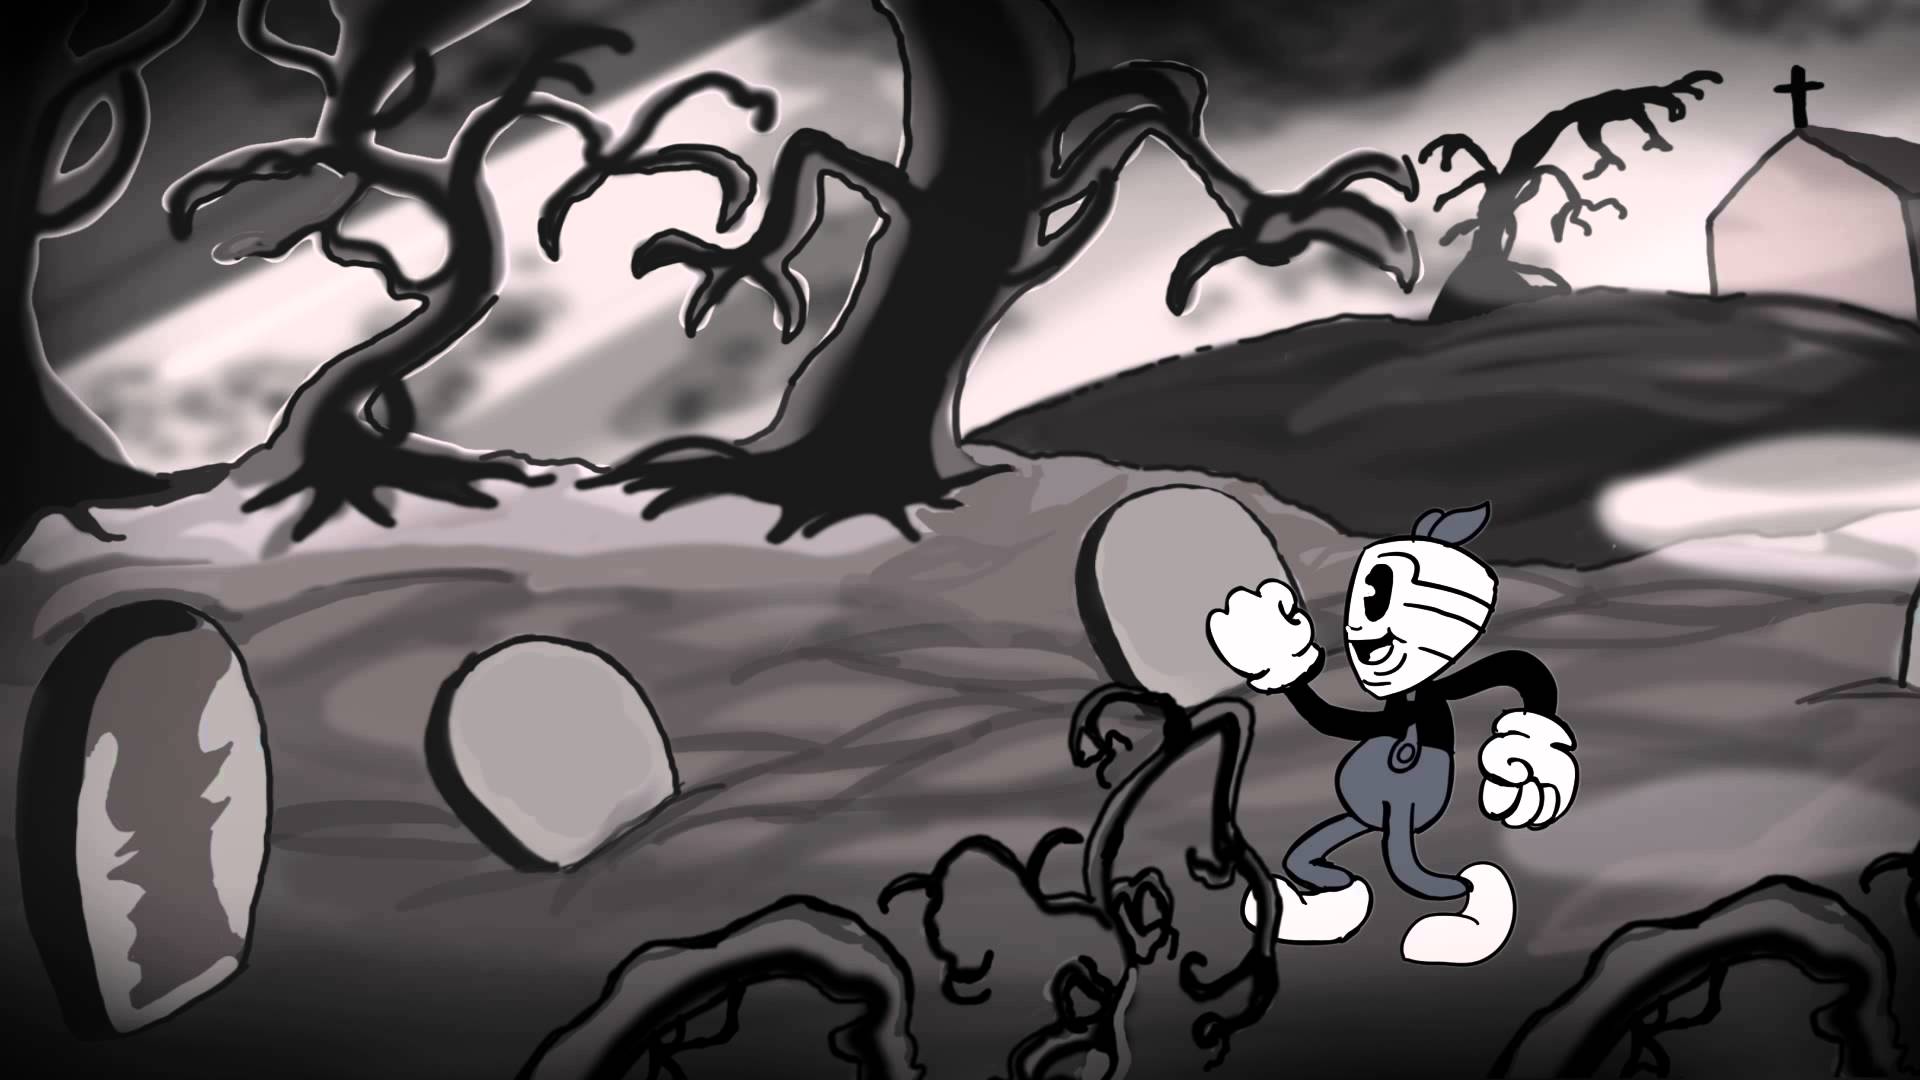 Daves Old School 1930s Style Animation Cycle - YouTube